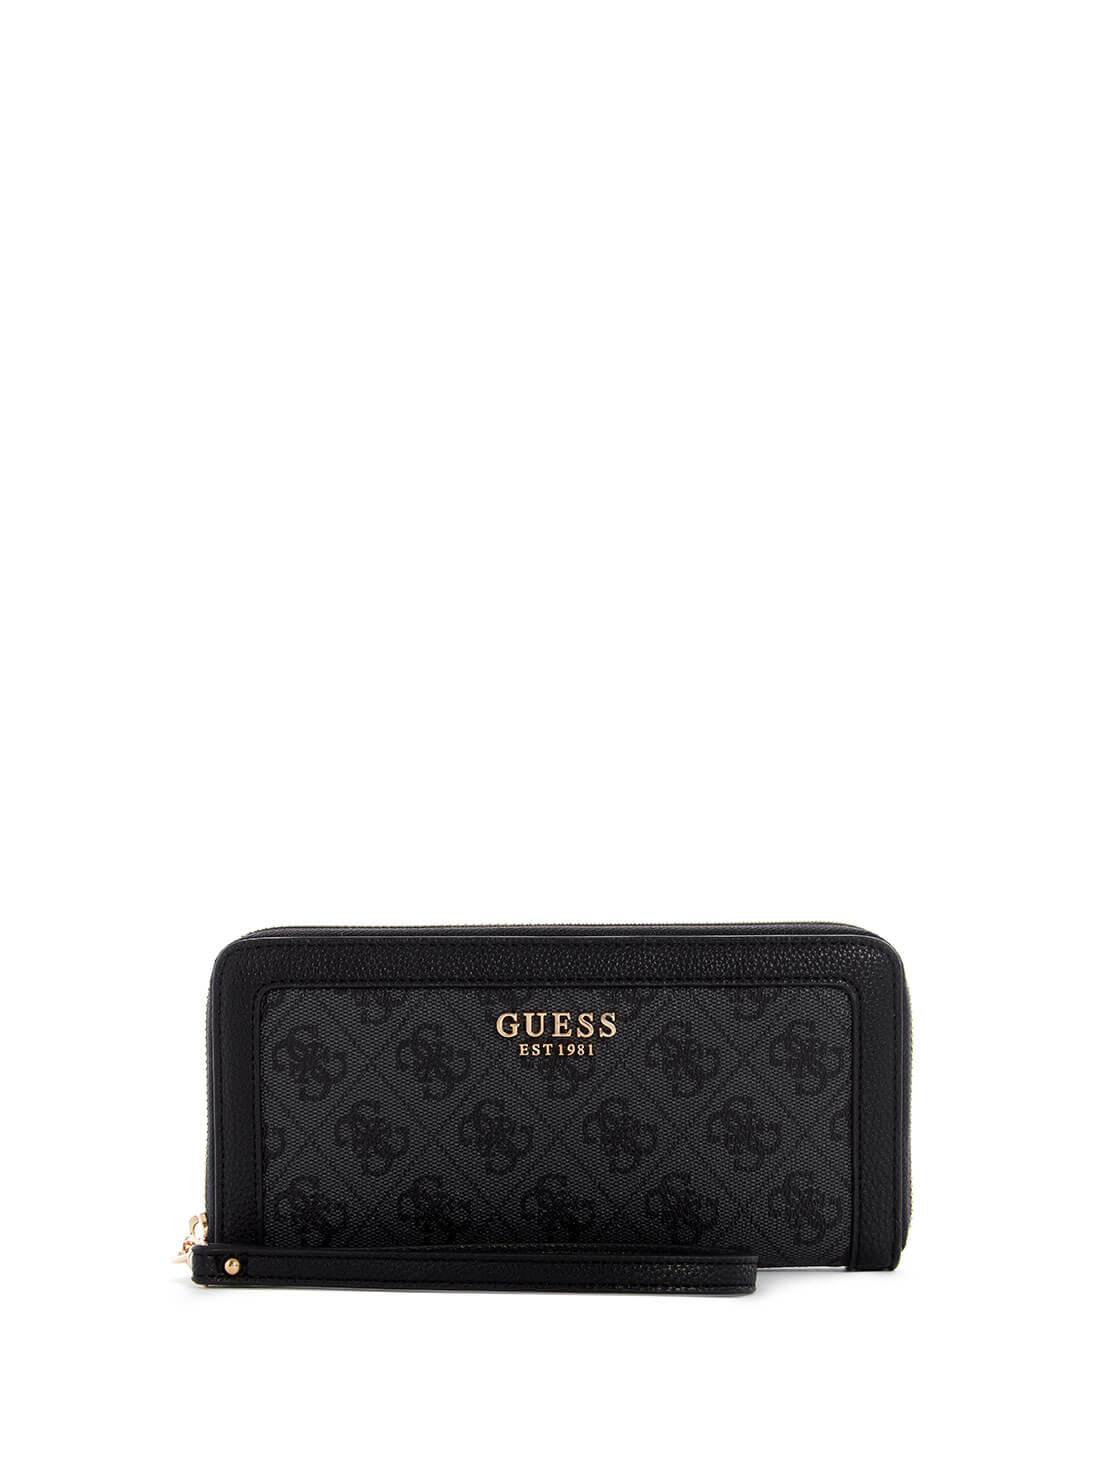 GUESS Womens Black Zadie Logo Large Wallet SG839646 Front View